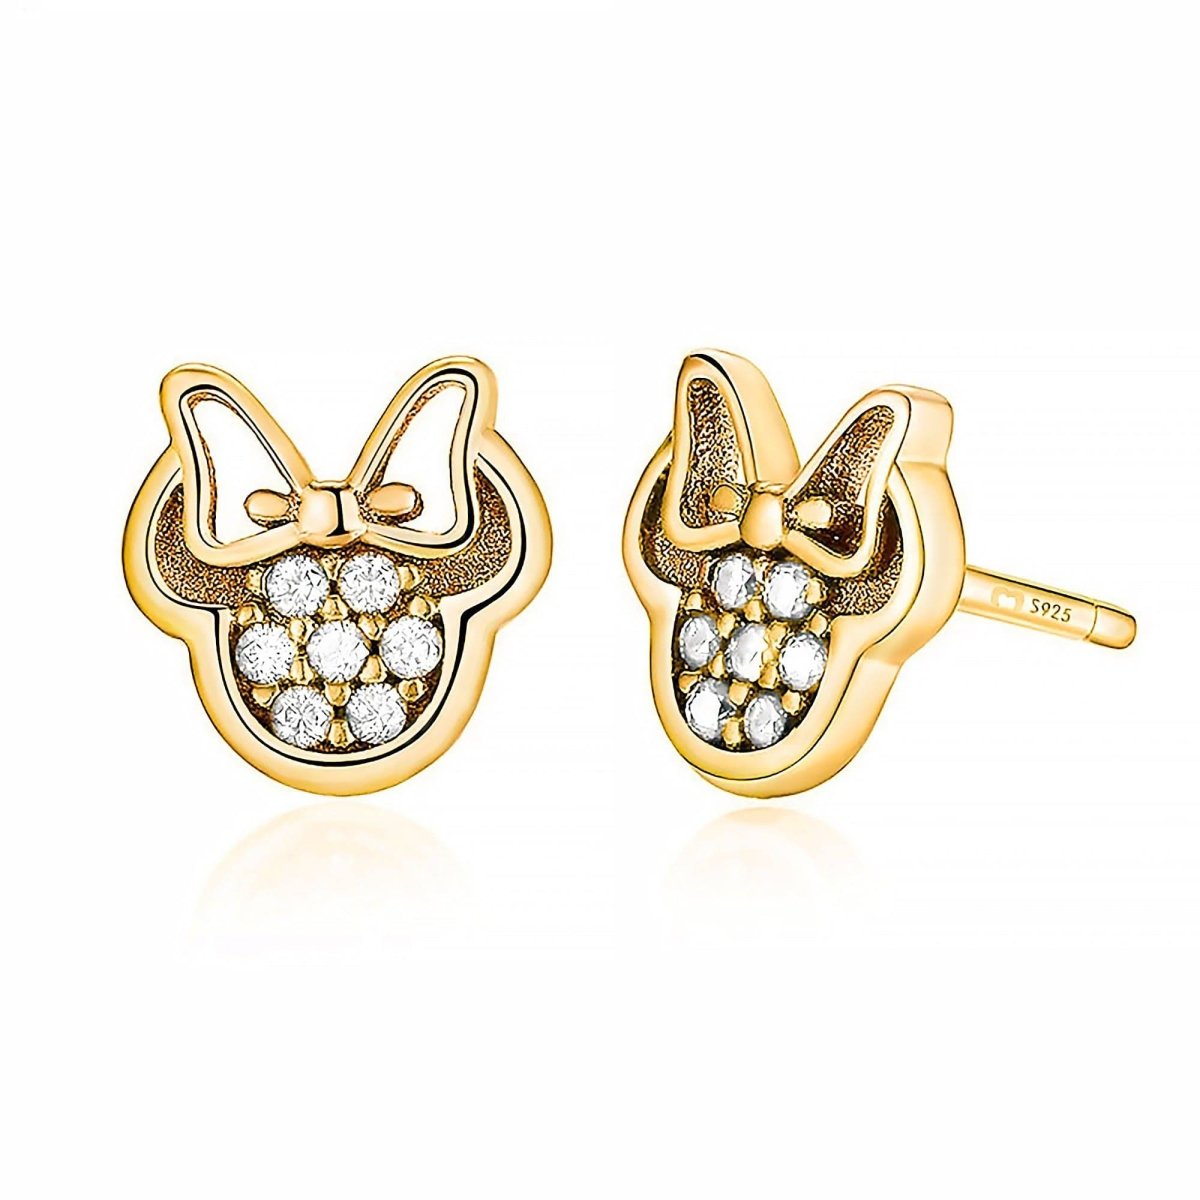 "Sparkly Minnie" Earrings - Milas Jewels Shop